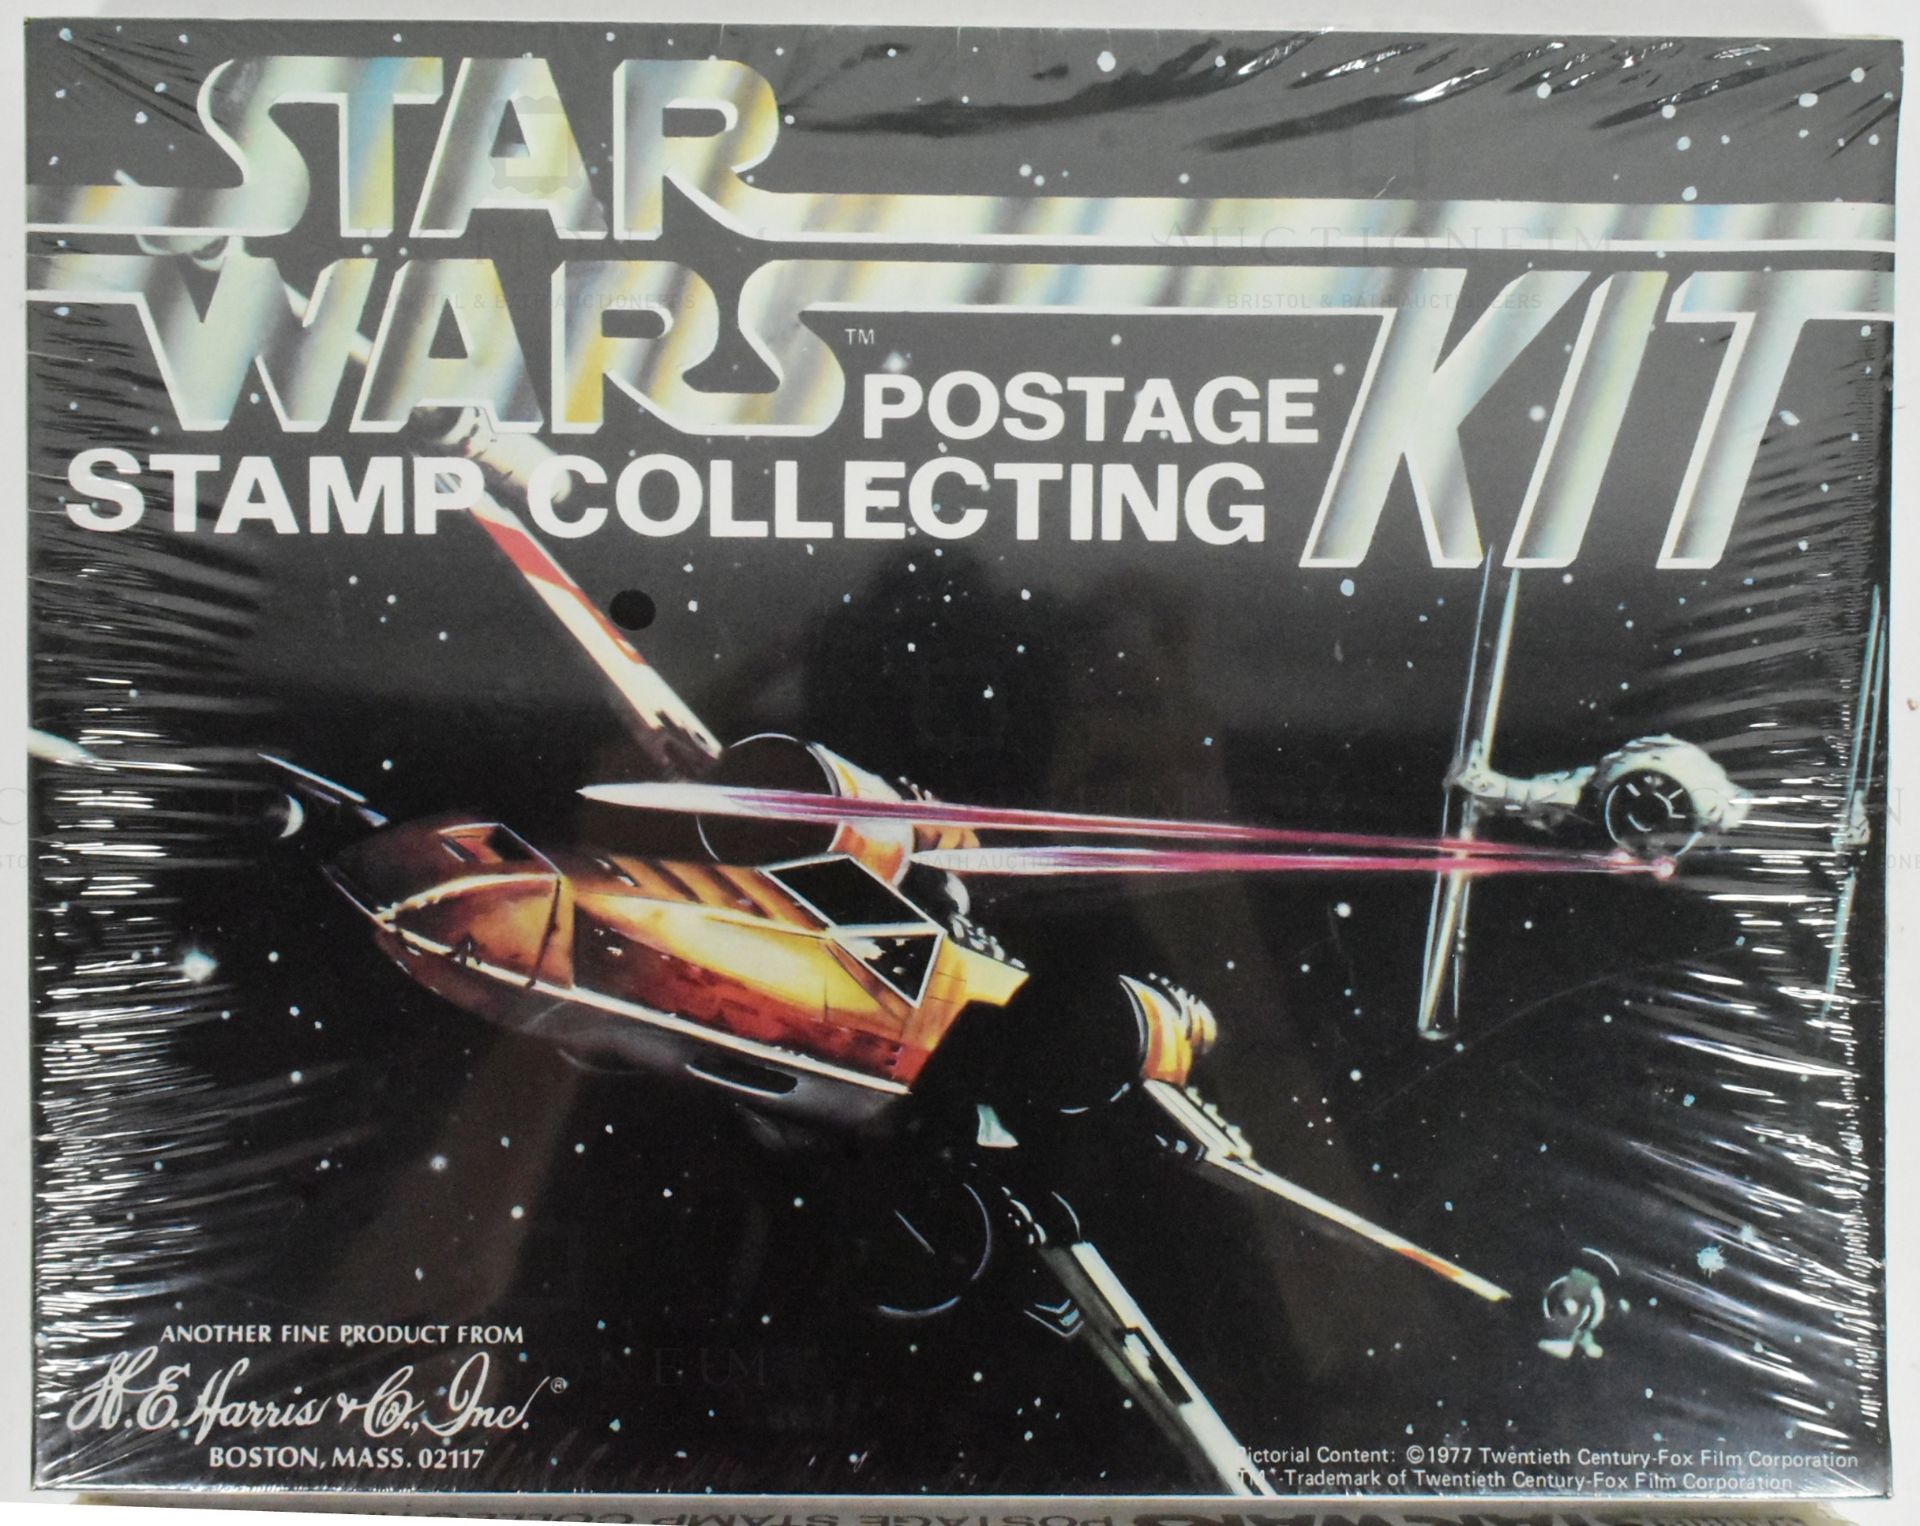 STAR WARS - HE HARRIS & CO - STAMP COLLECTING KIT - FACTORY SEALED - Image 3 of 4